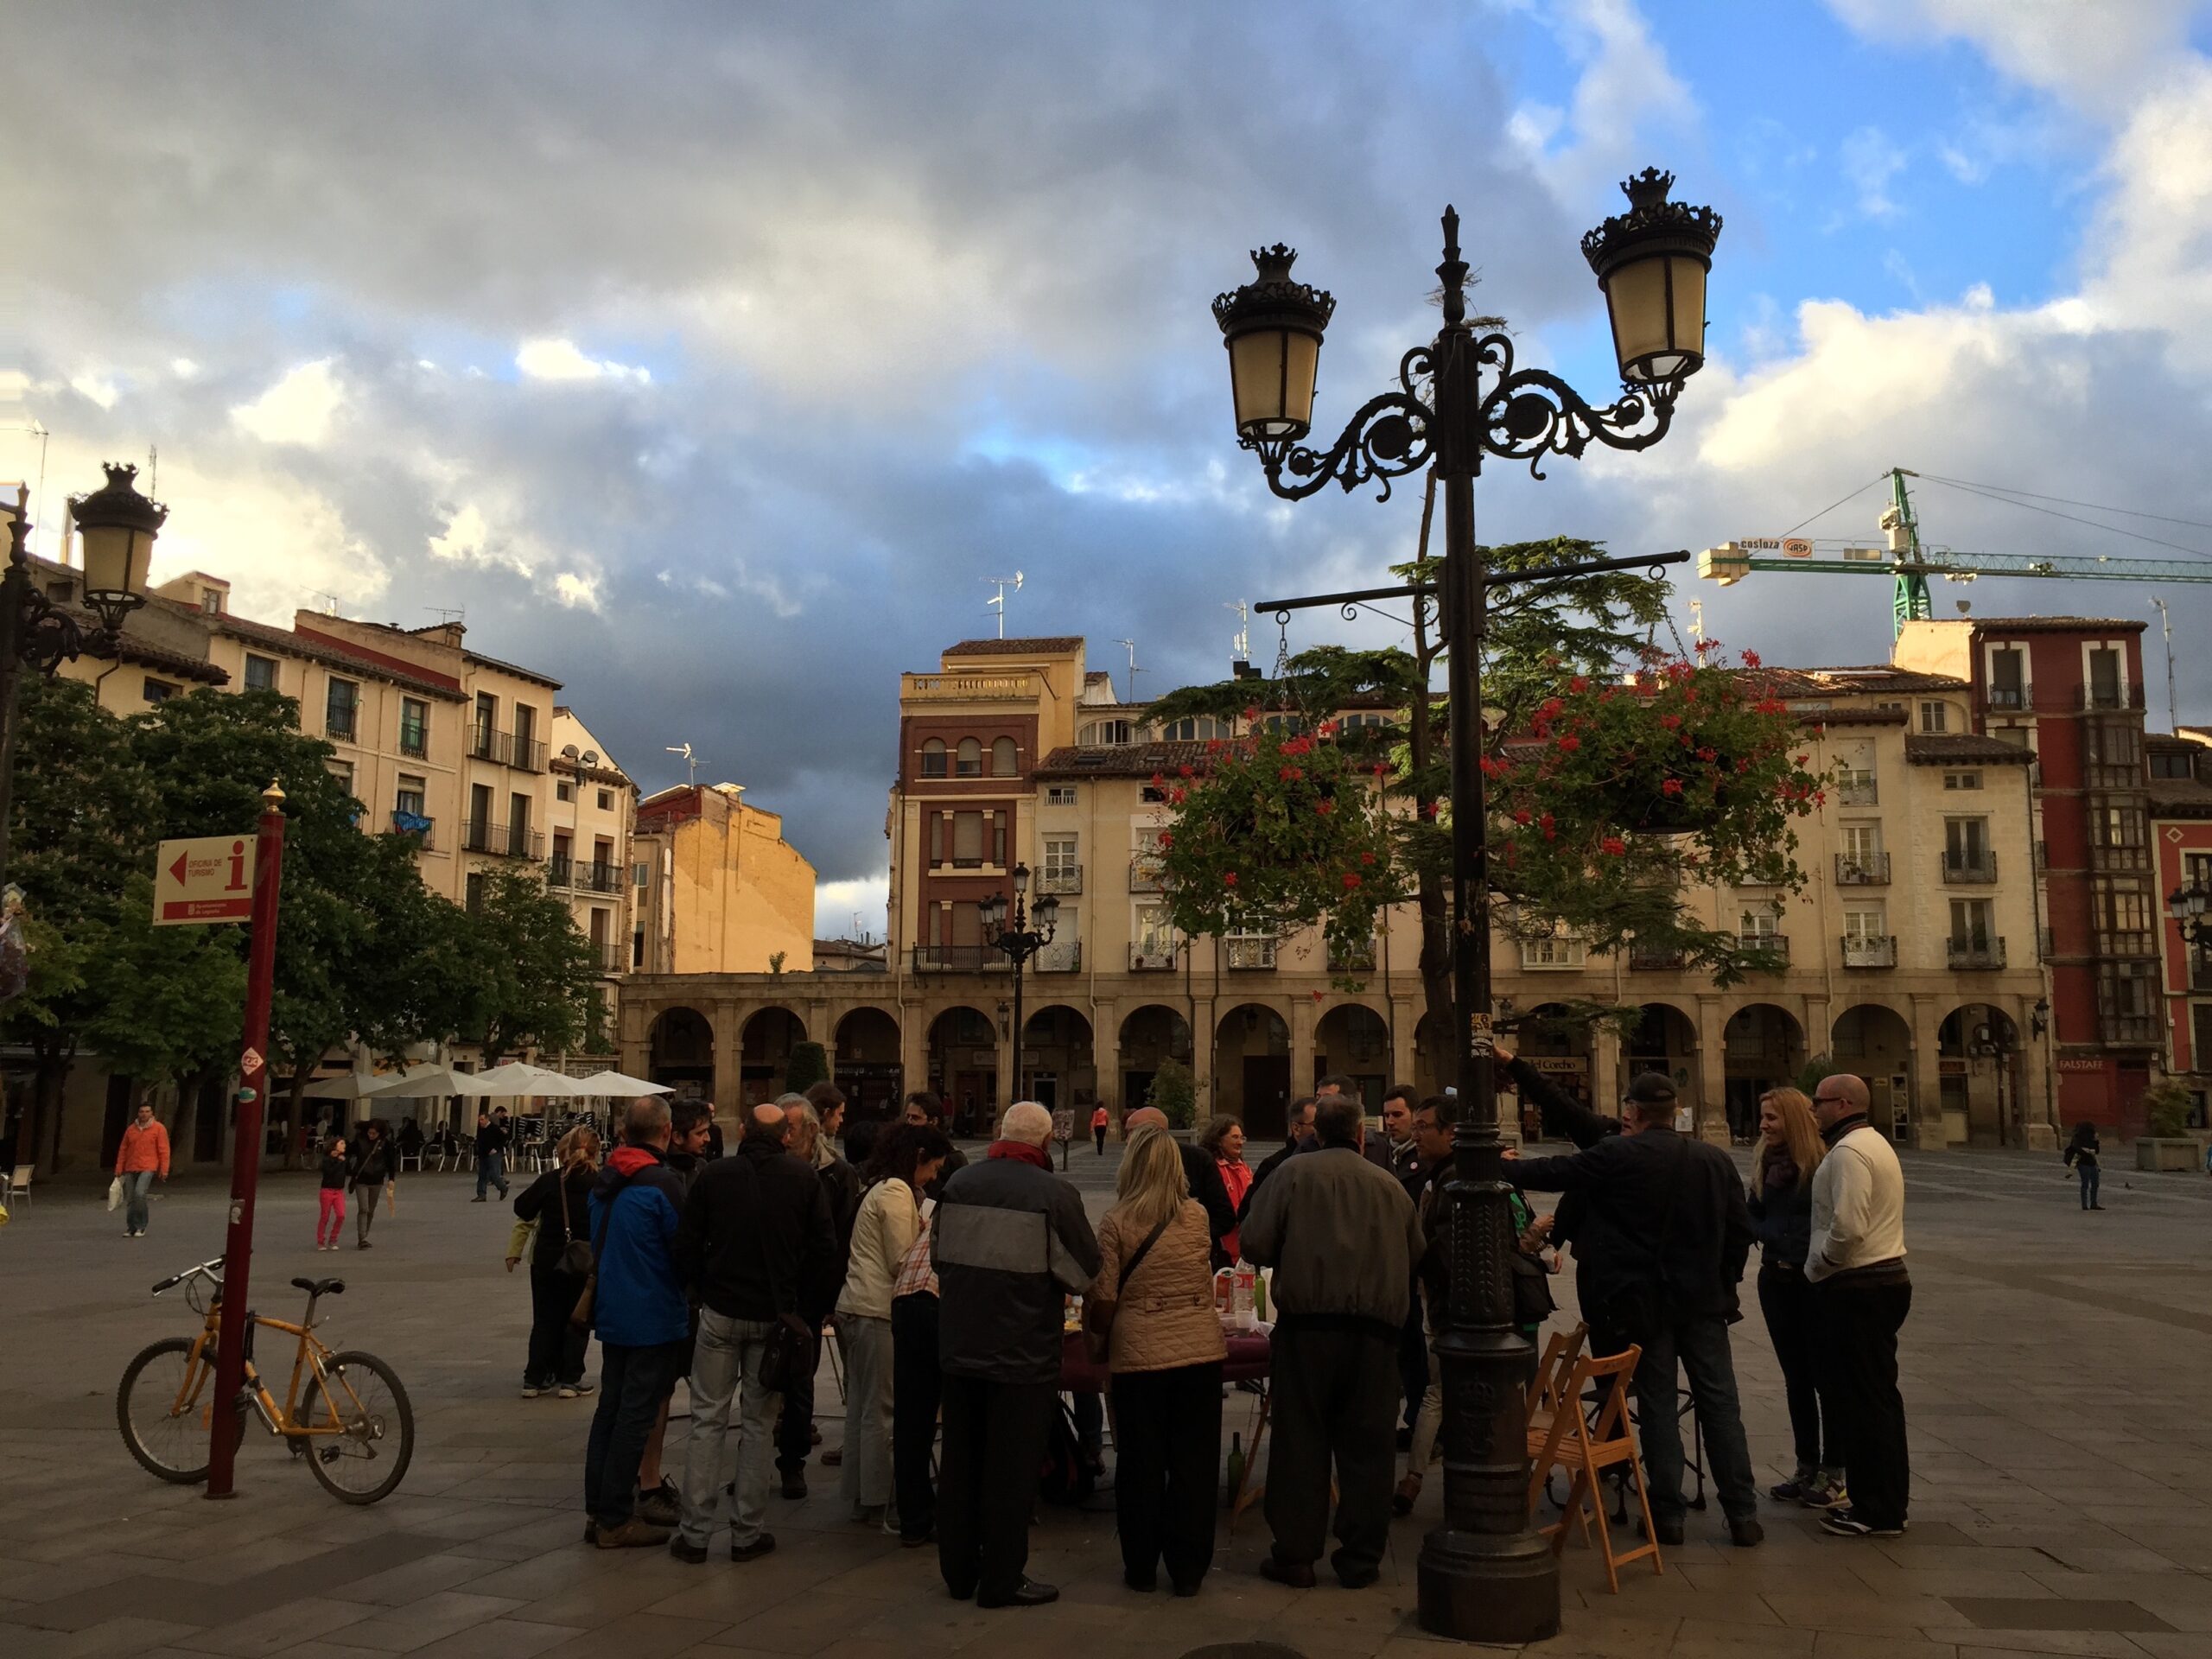 People gather in a plaza in Logro&ntilde;o, Spain.